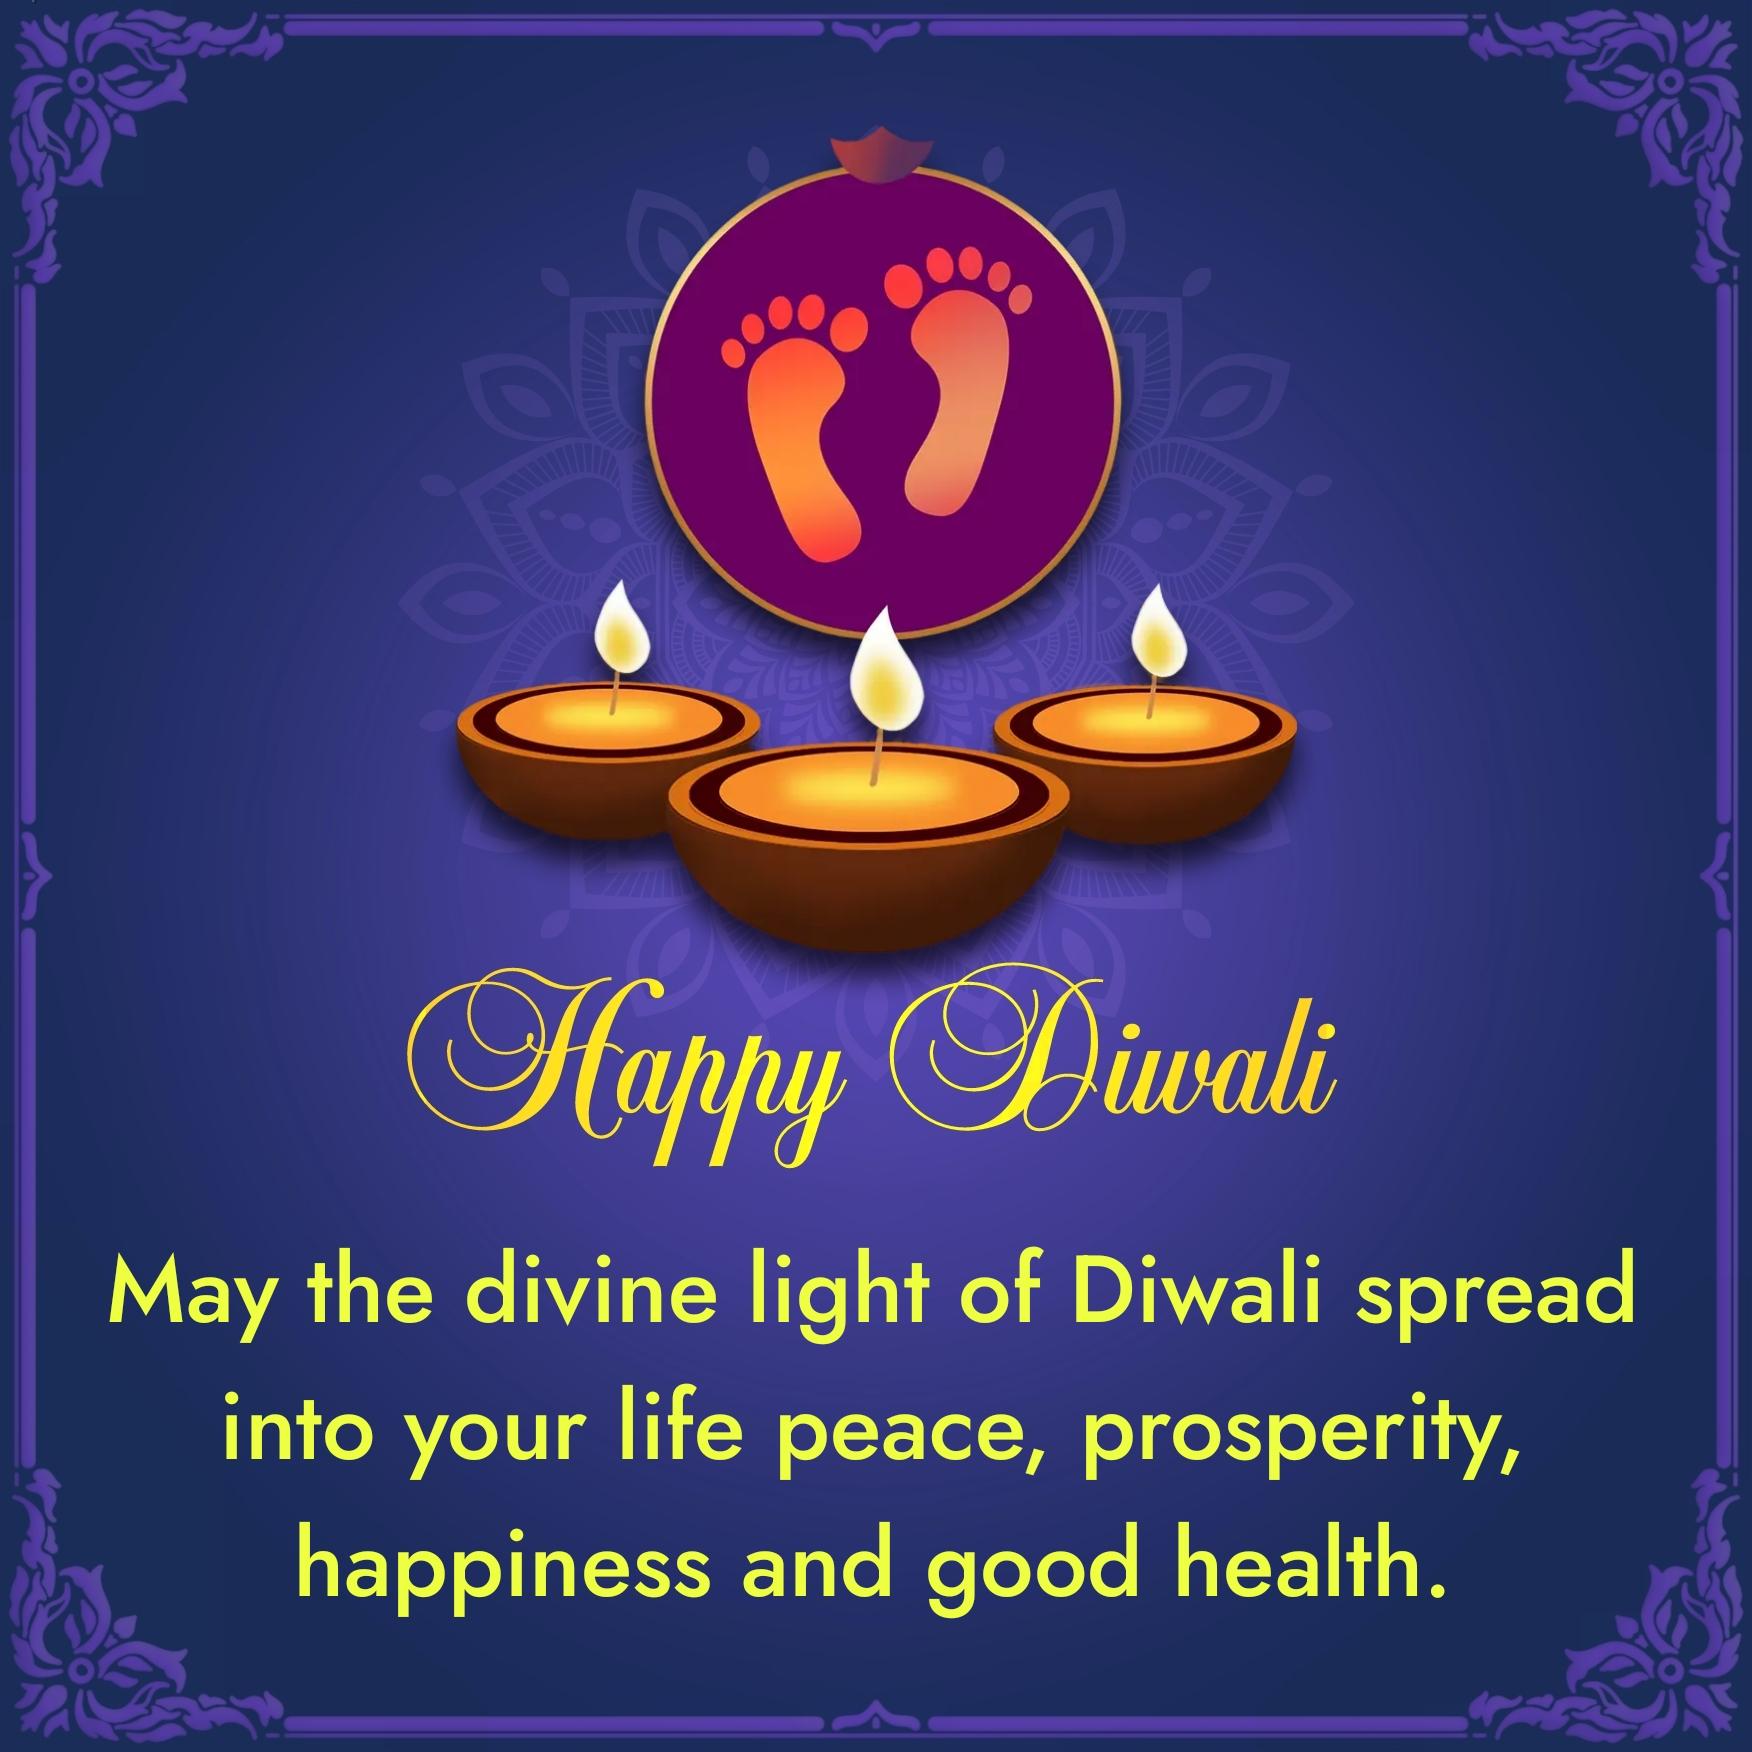 May the divine light of Diwali spread into your life